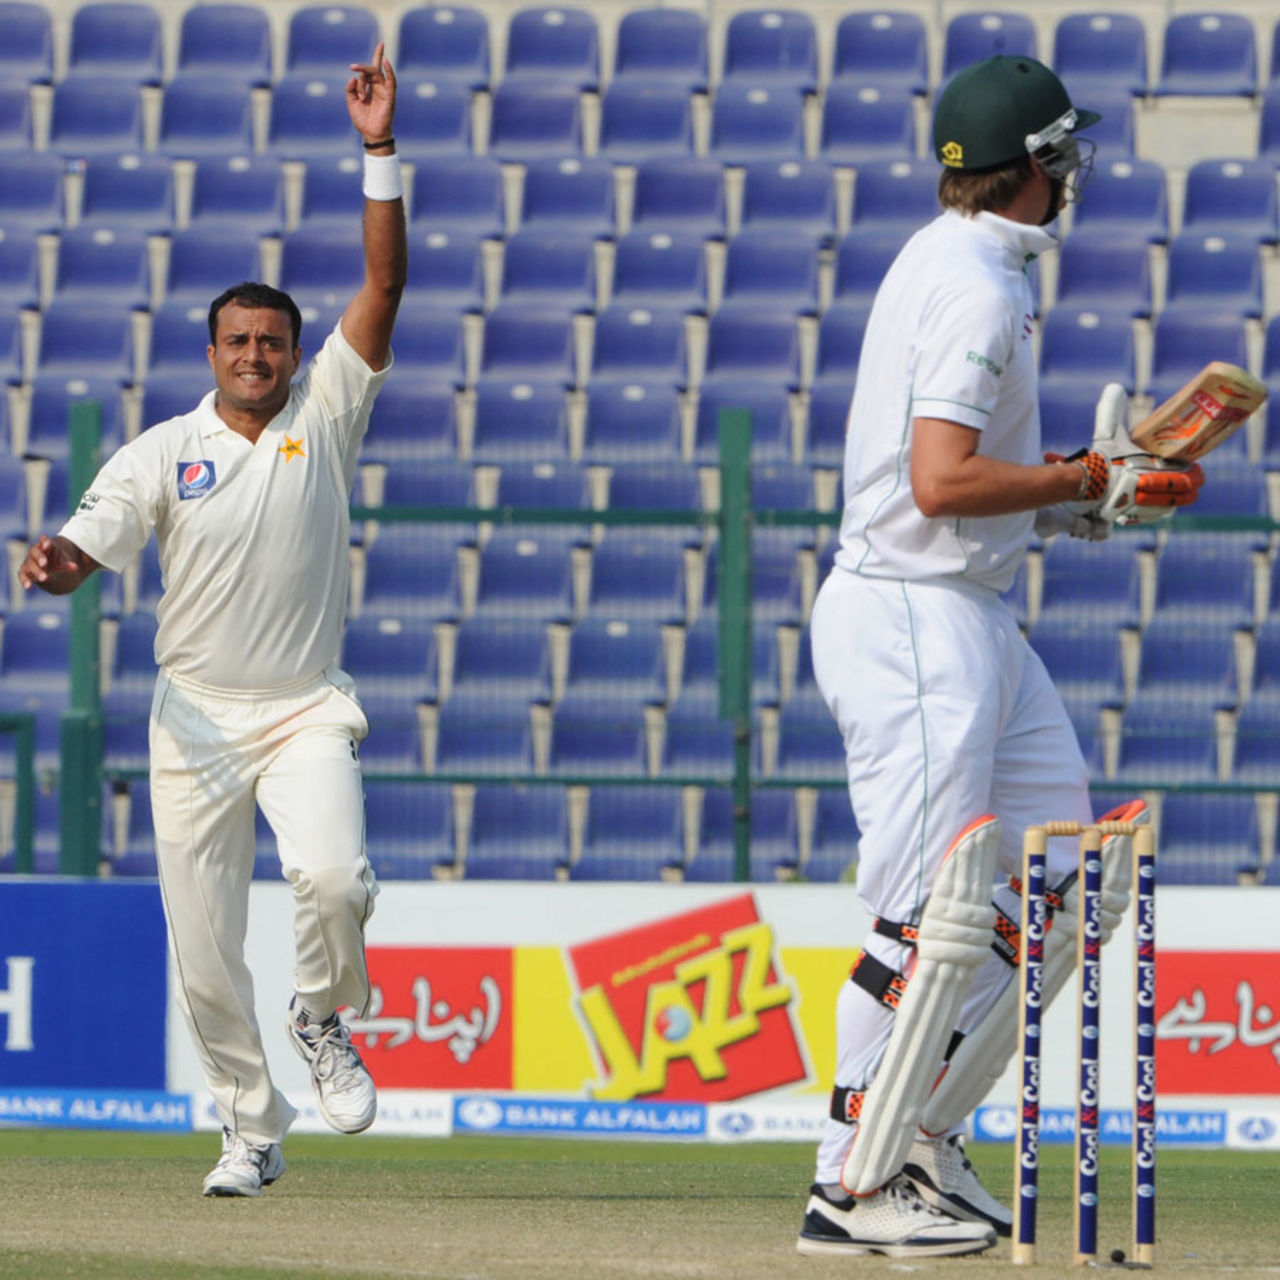 Tanvir Ahmed takes his sixth wicket of the innings, Pakistan v South Africa, 2nd Test, Abu Dhabi, 2nd day, November 21, 2010